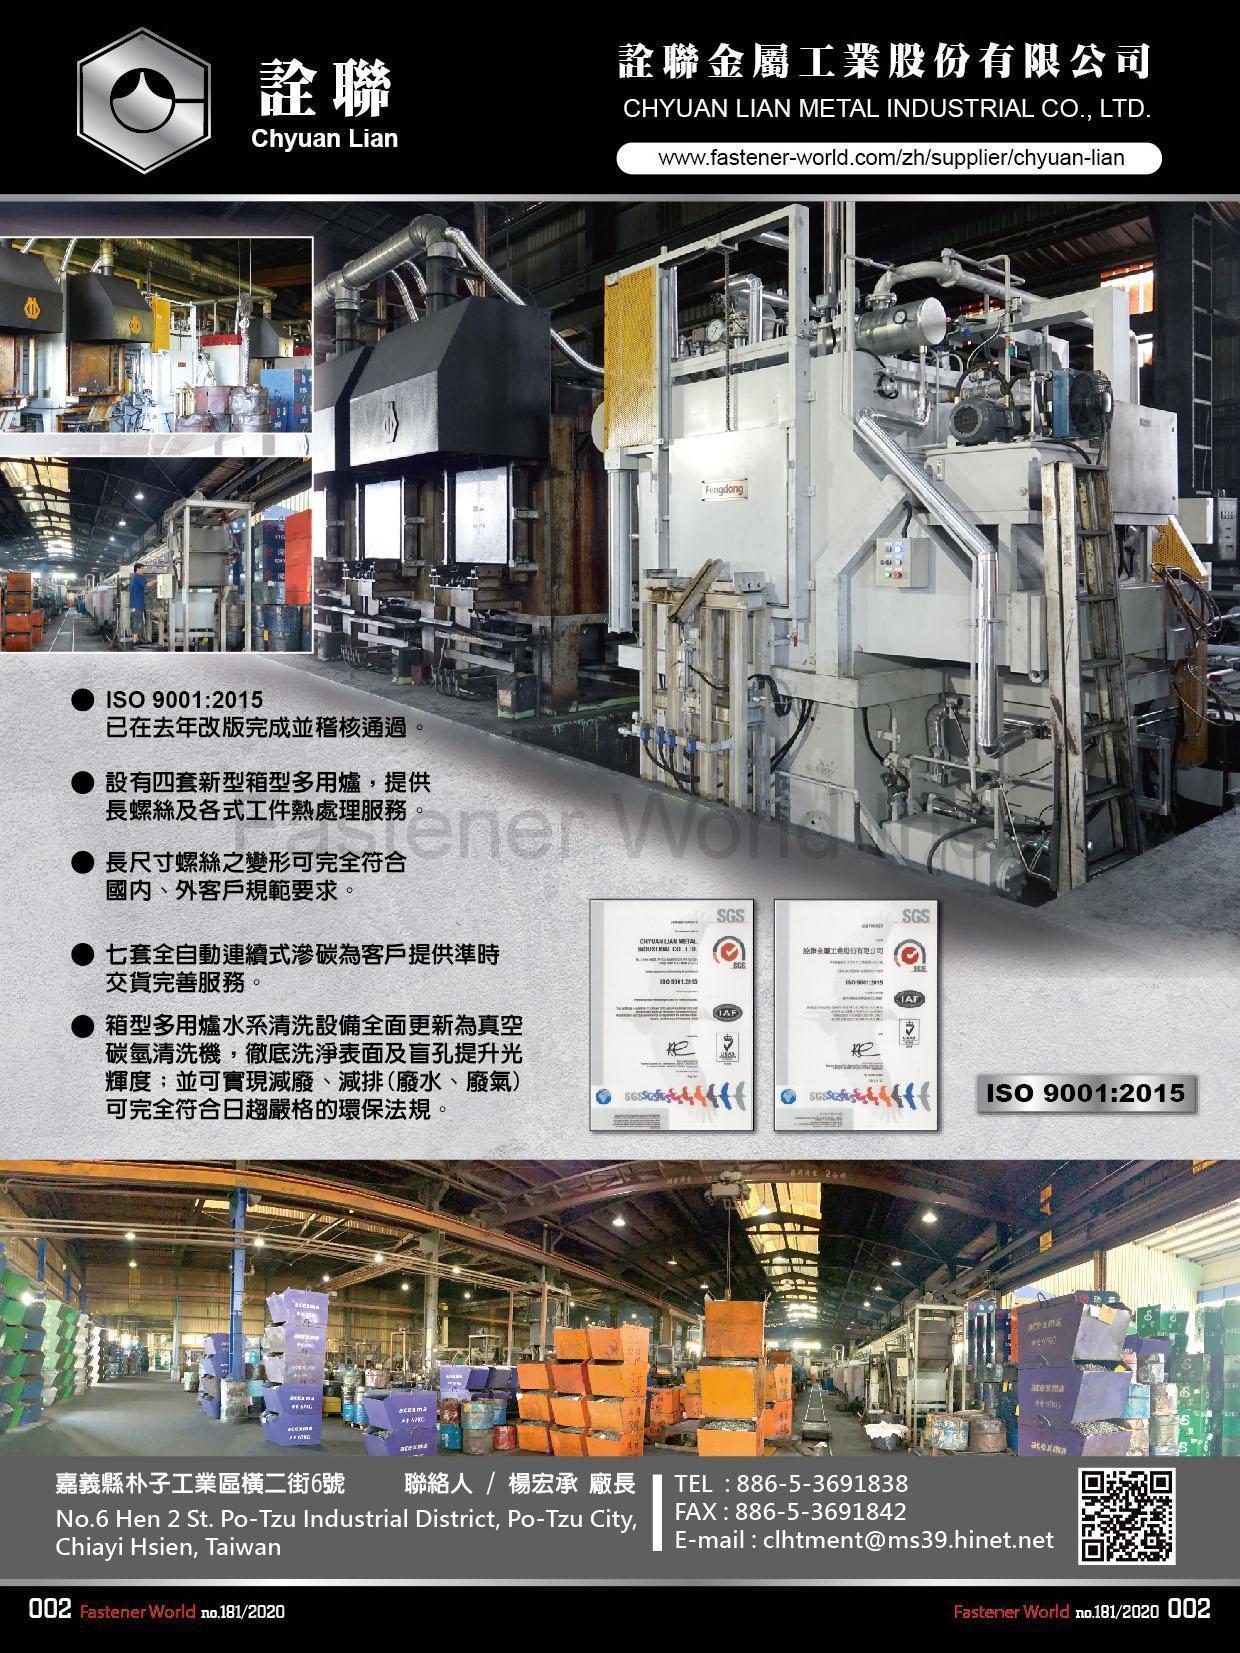 CHYUAN LIAN METAL INDUSTRIAL CO., LTD. , Heat Treatment  , Surface Treatment And Related Equipment